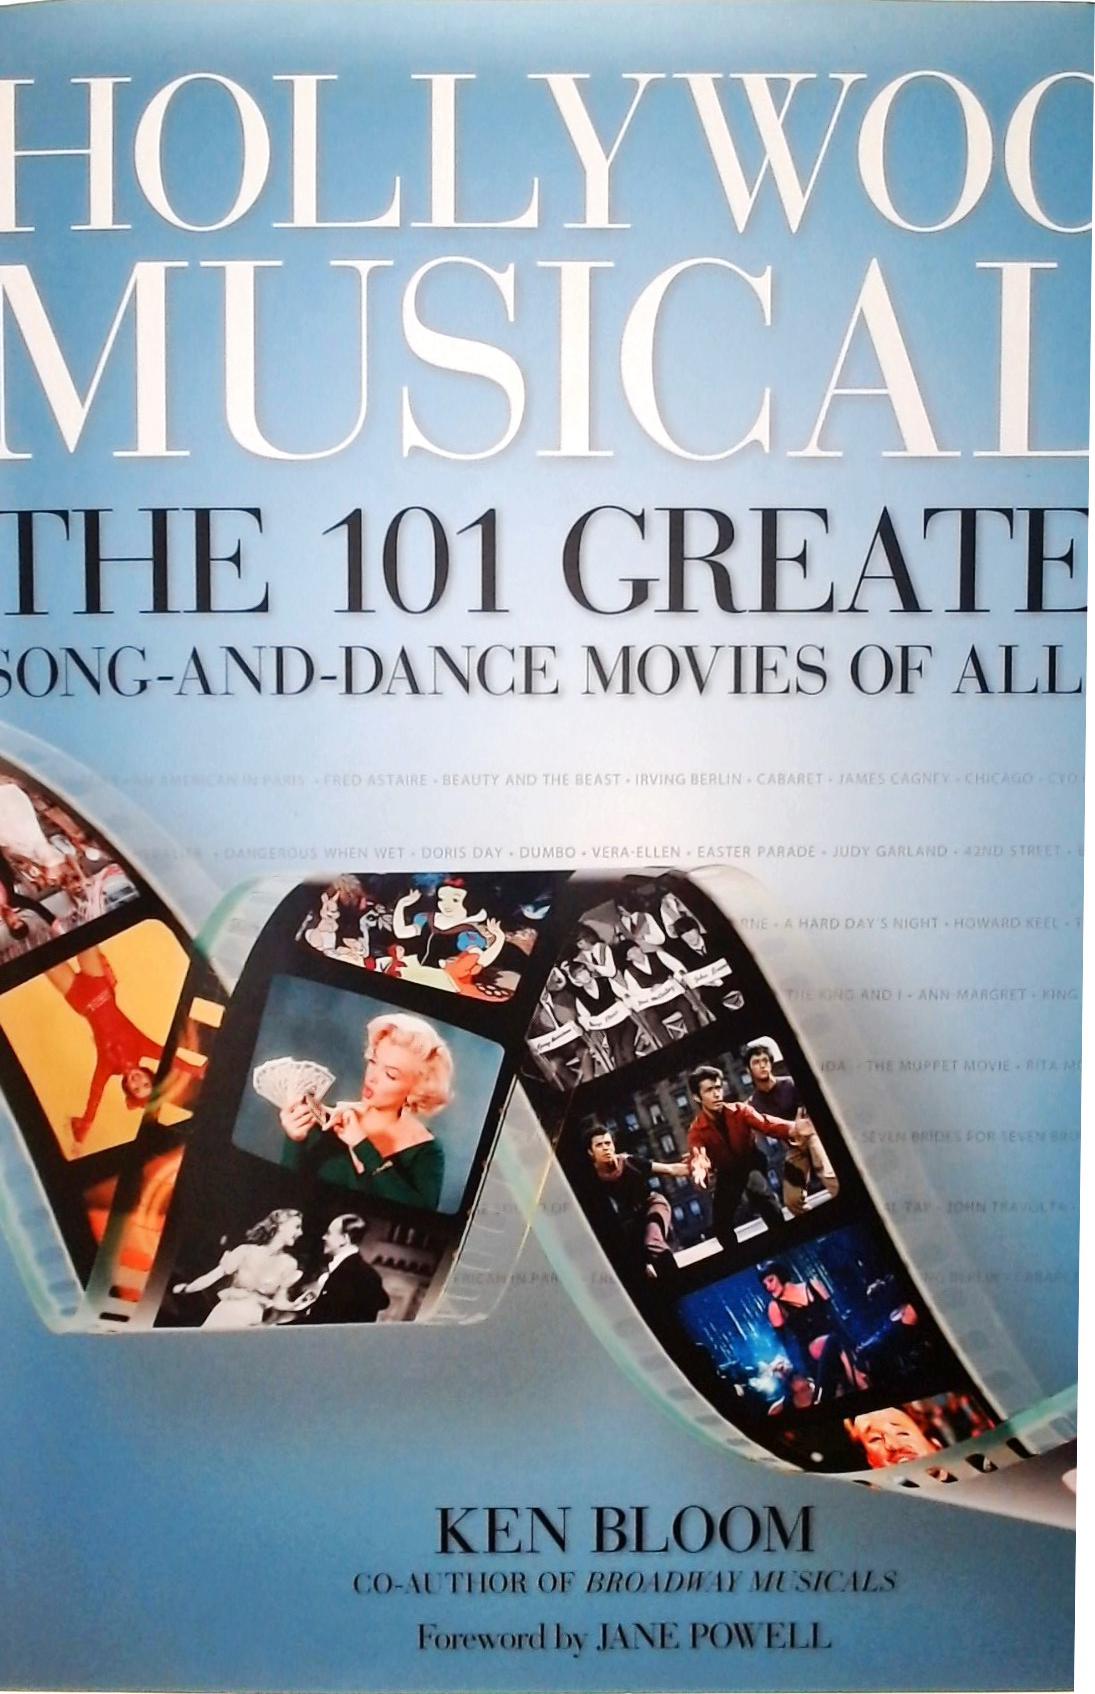 Hollywood Musicals - The 101 Greatest Song-and-Dance Movies of All Time